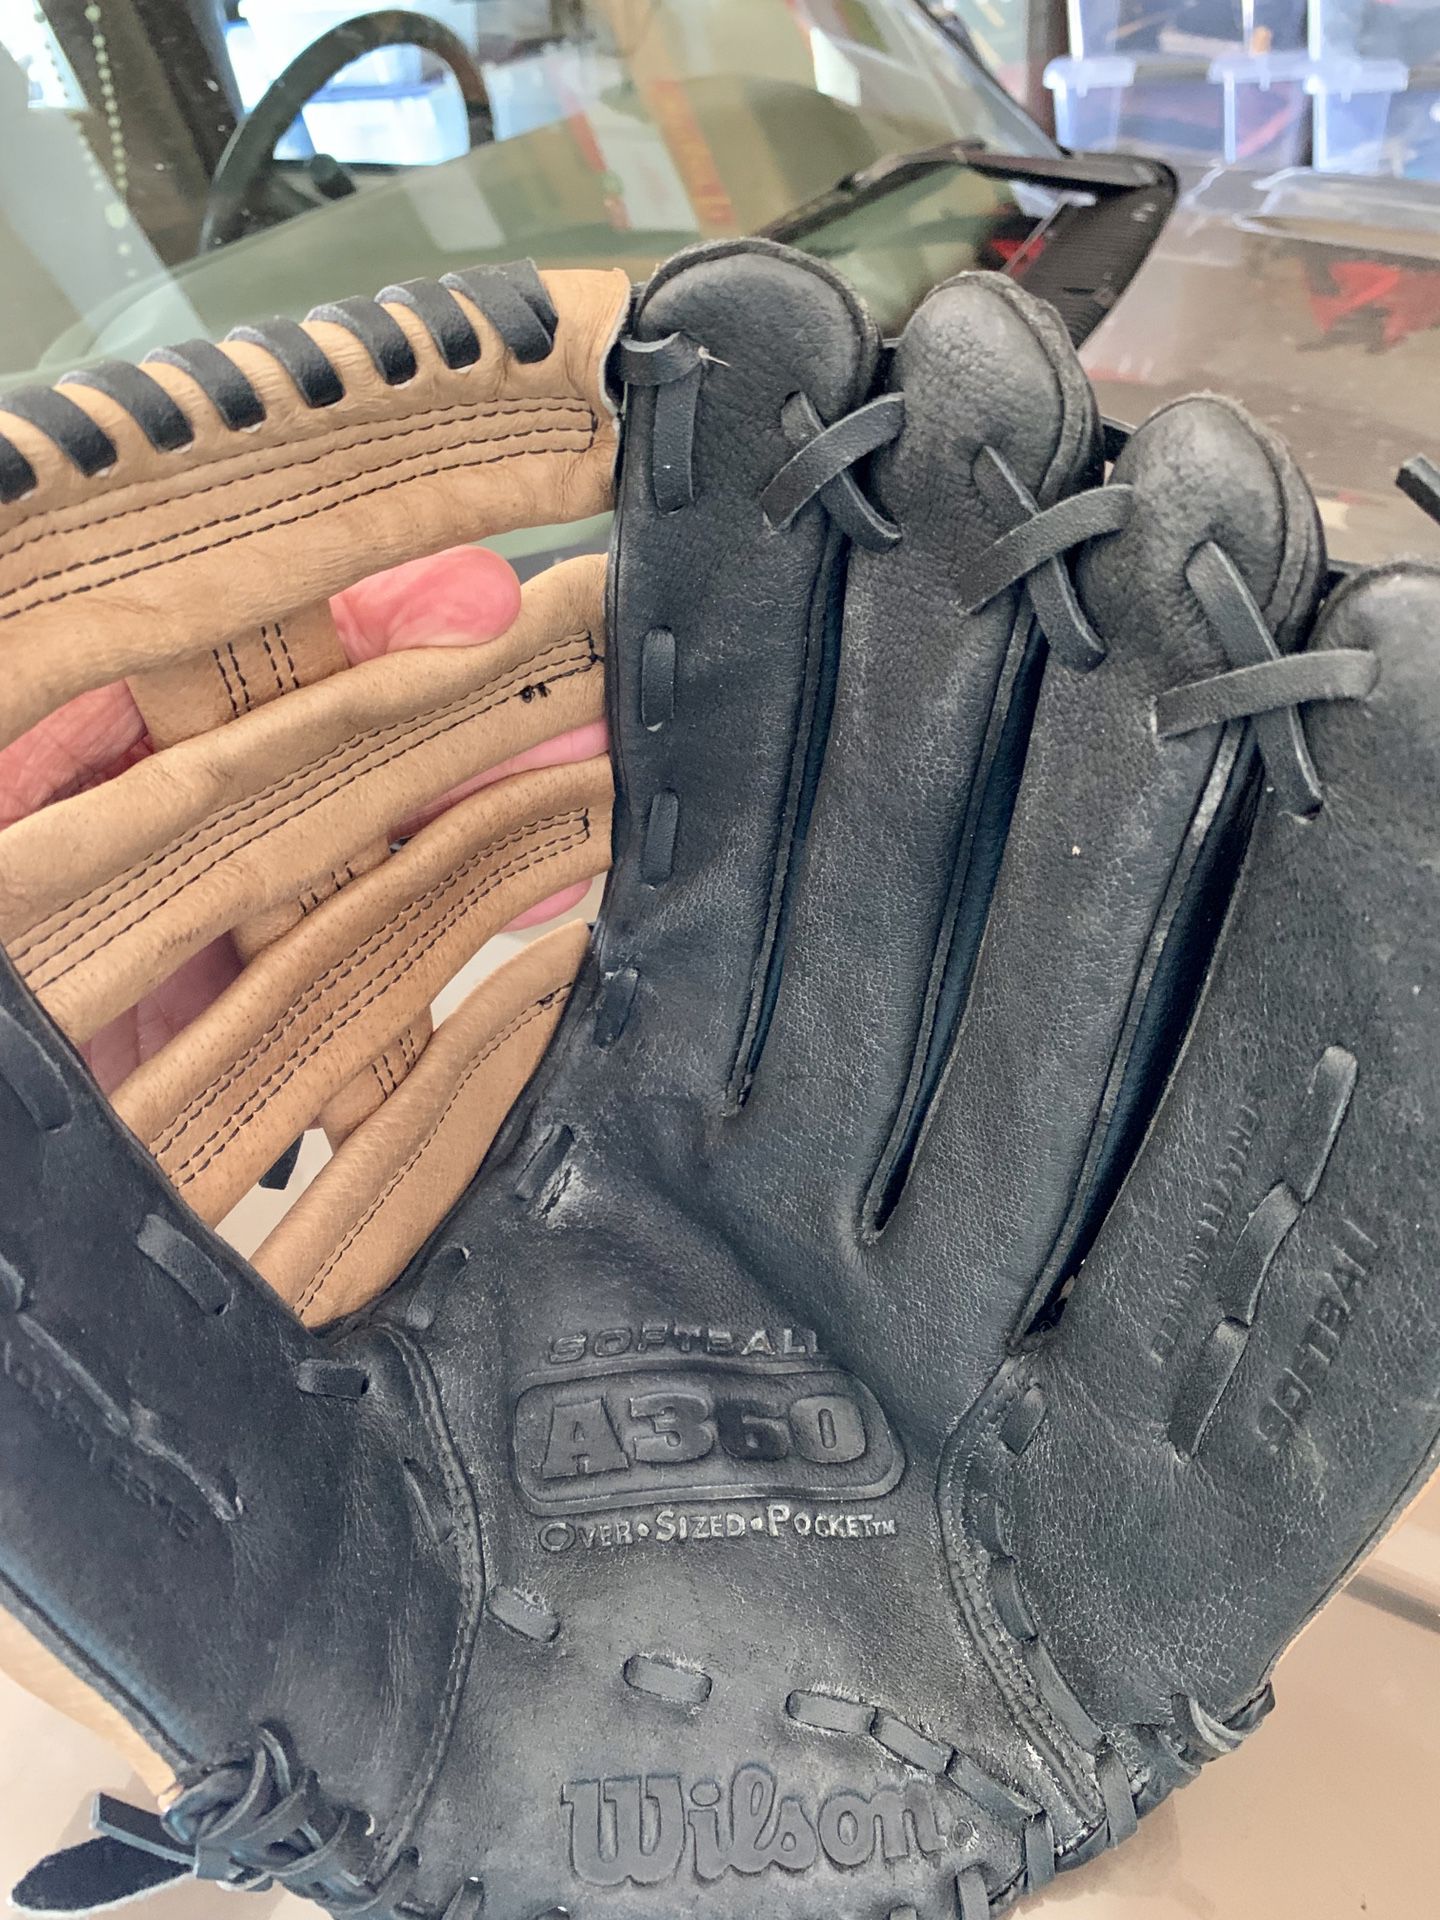 Wilson Softball Glove A360. ( one owner )used